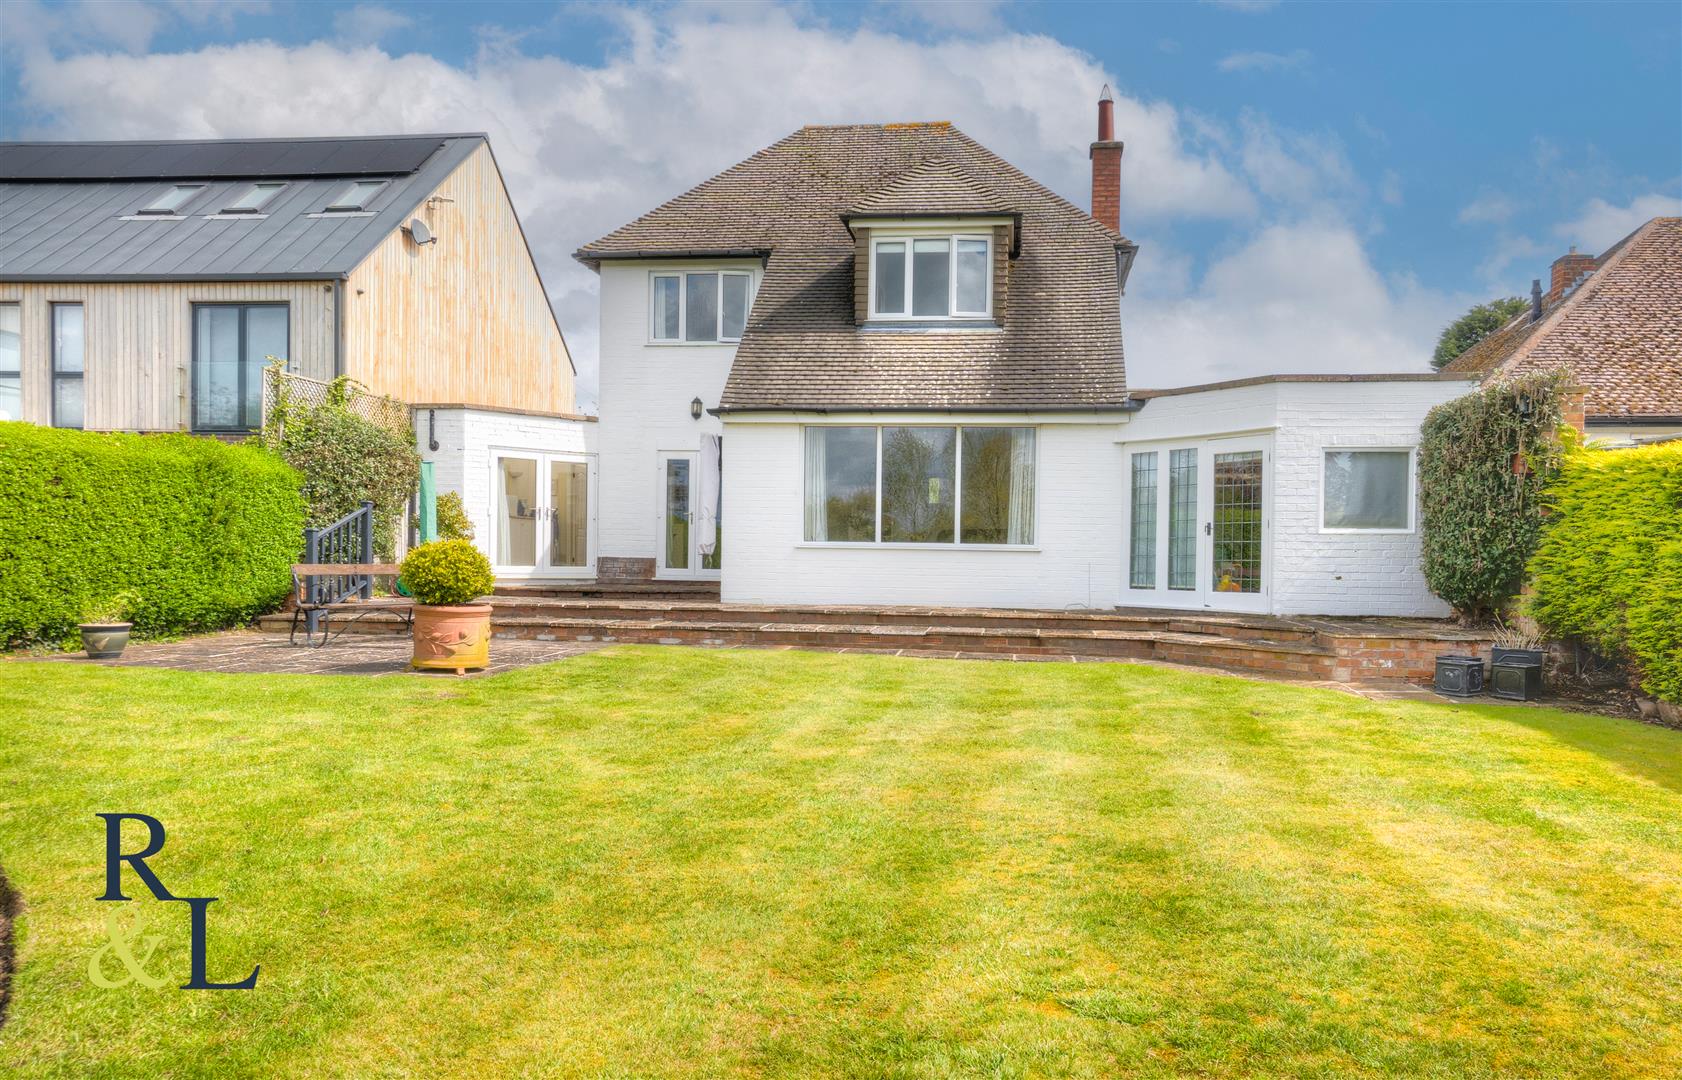 Property image for Stanton Lane, Stanton-on-the-Wolds, Nottingham